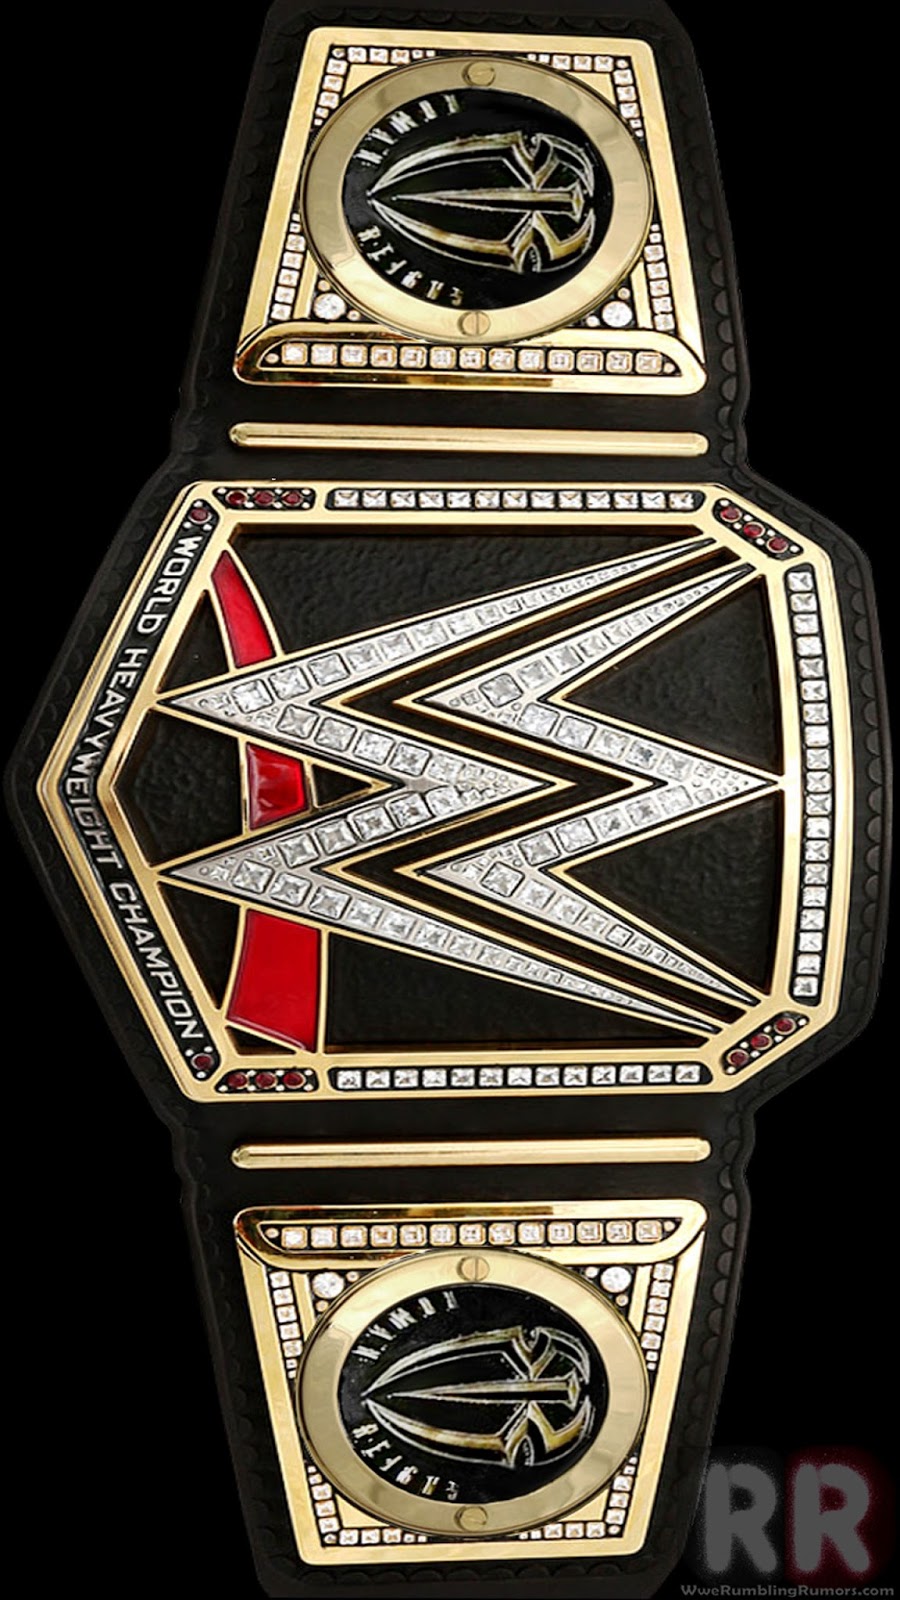 Wwe Logo Wallpaper Iphone / Wwe Iphone Wallpapers Posted ...